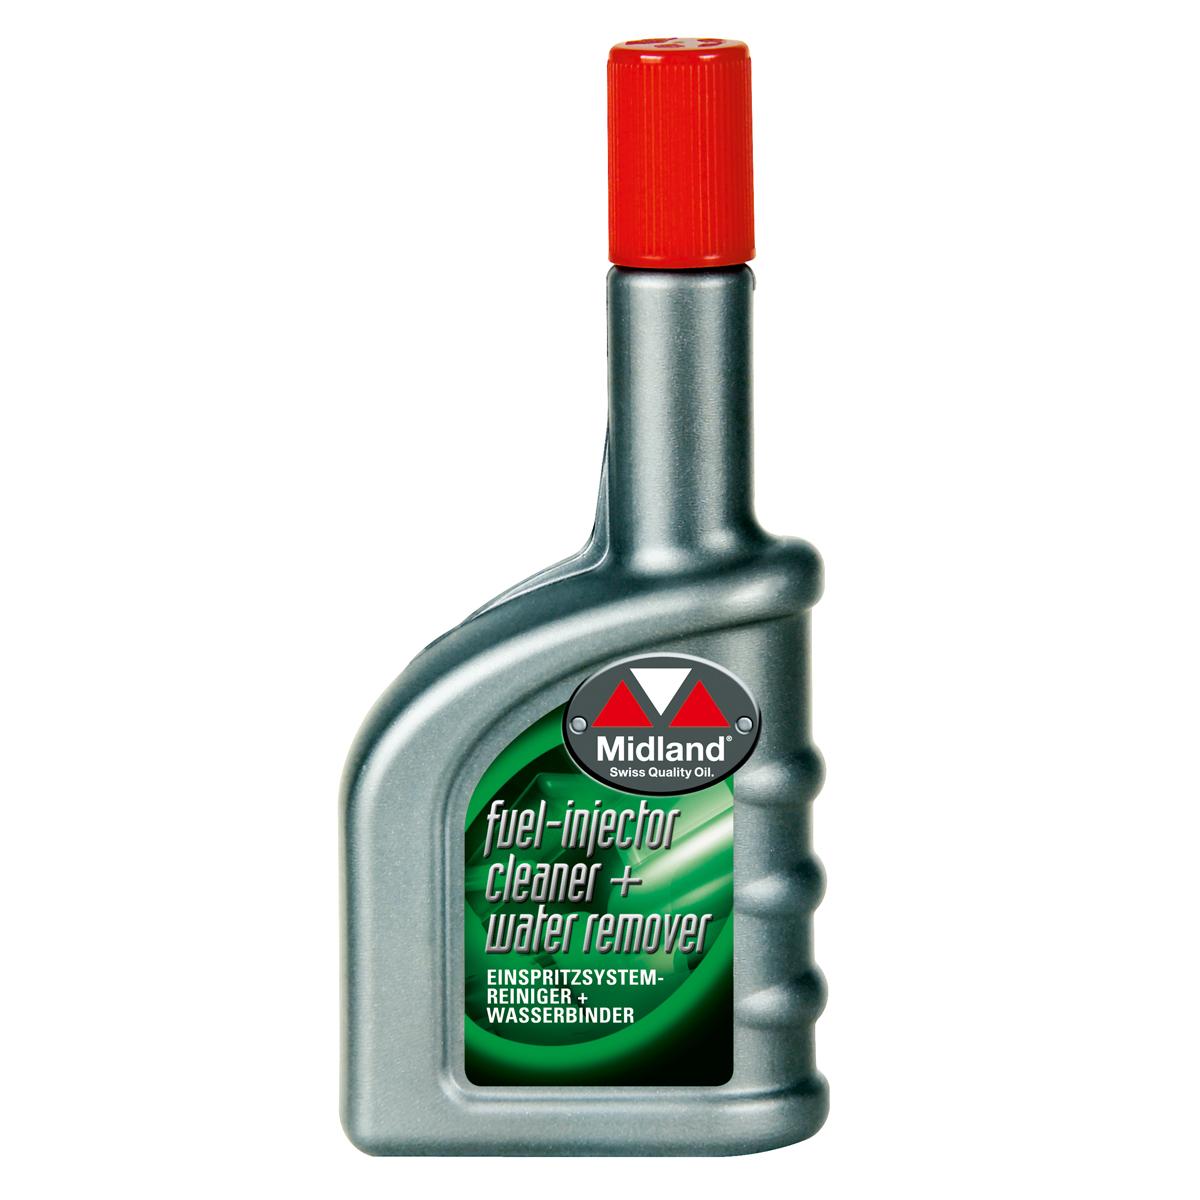 Fuel-Injector Cleaner & Water Remover